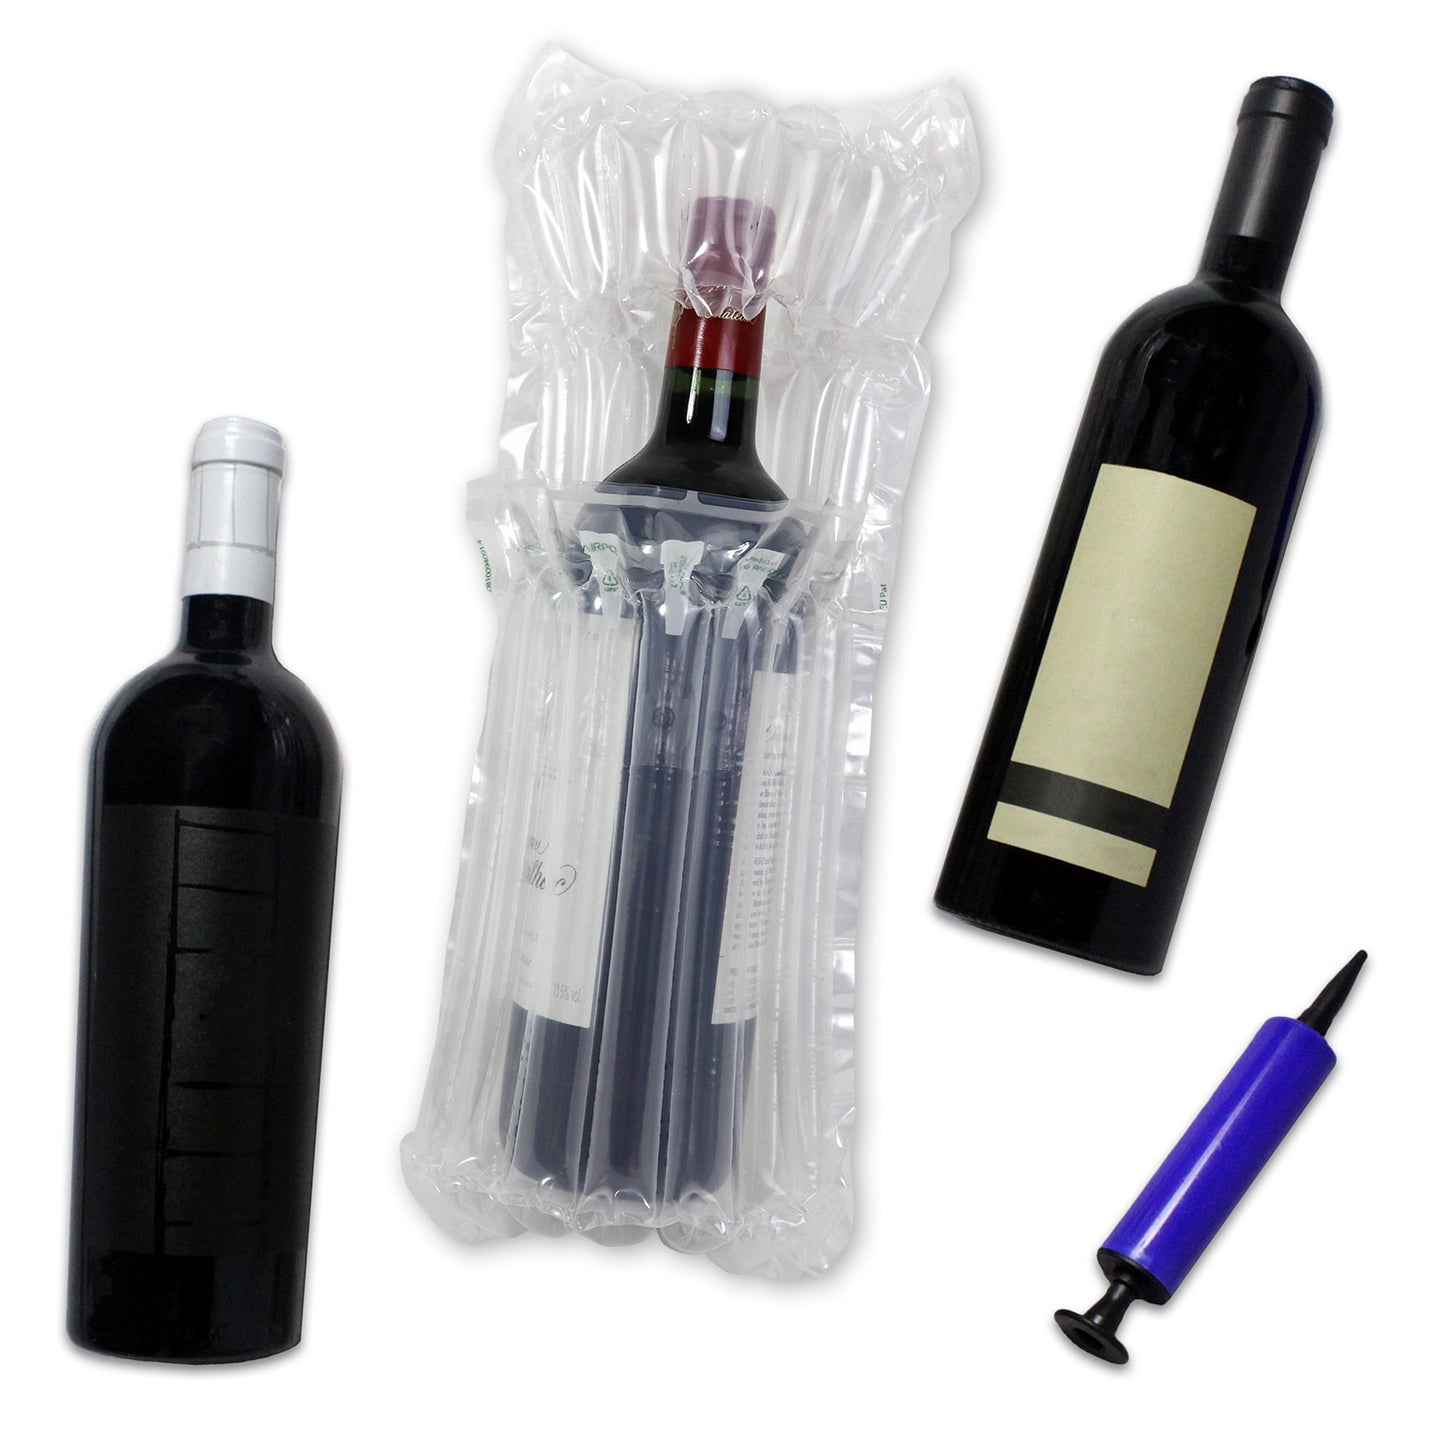 Inflatable Wine Bottle Protector Bags